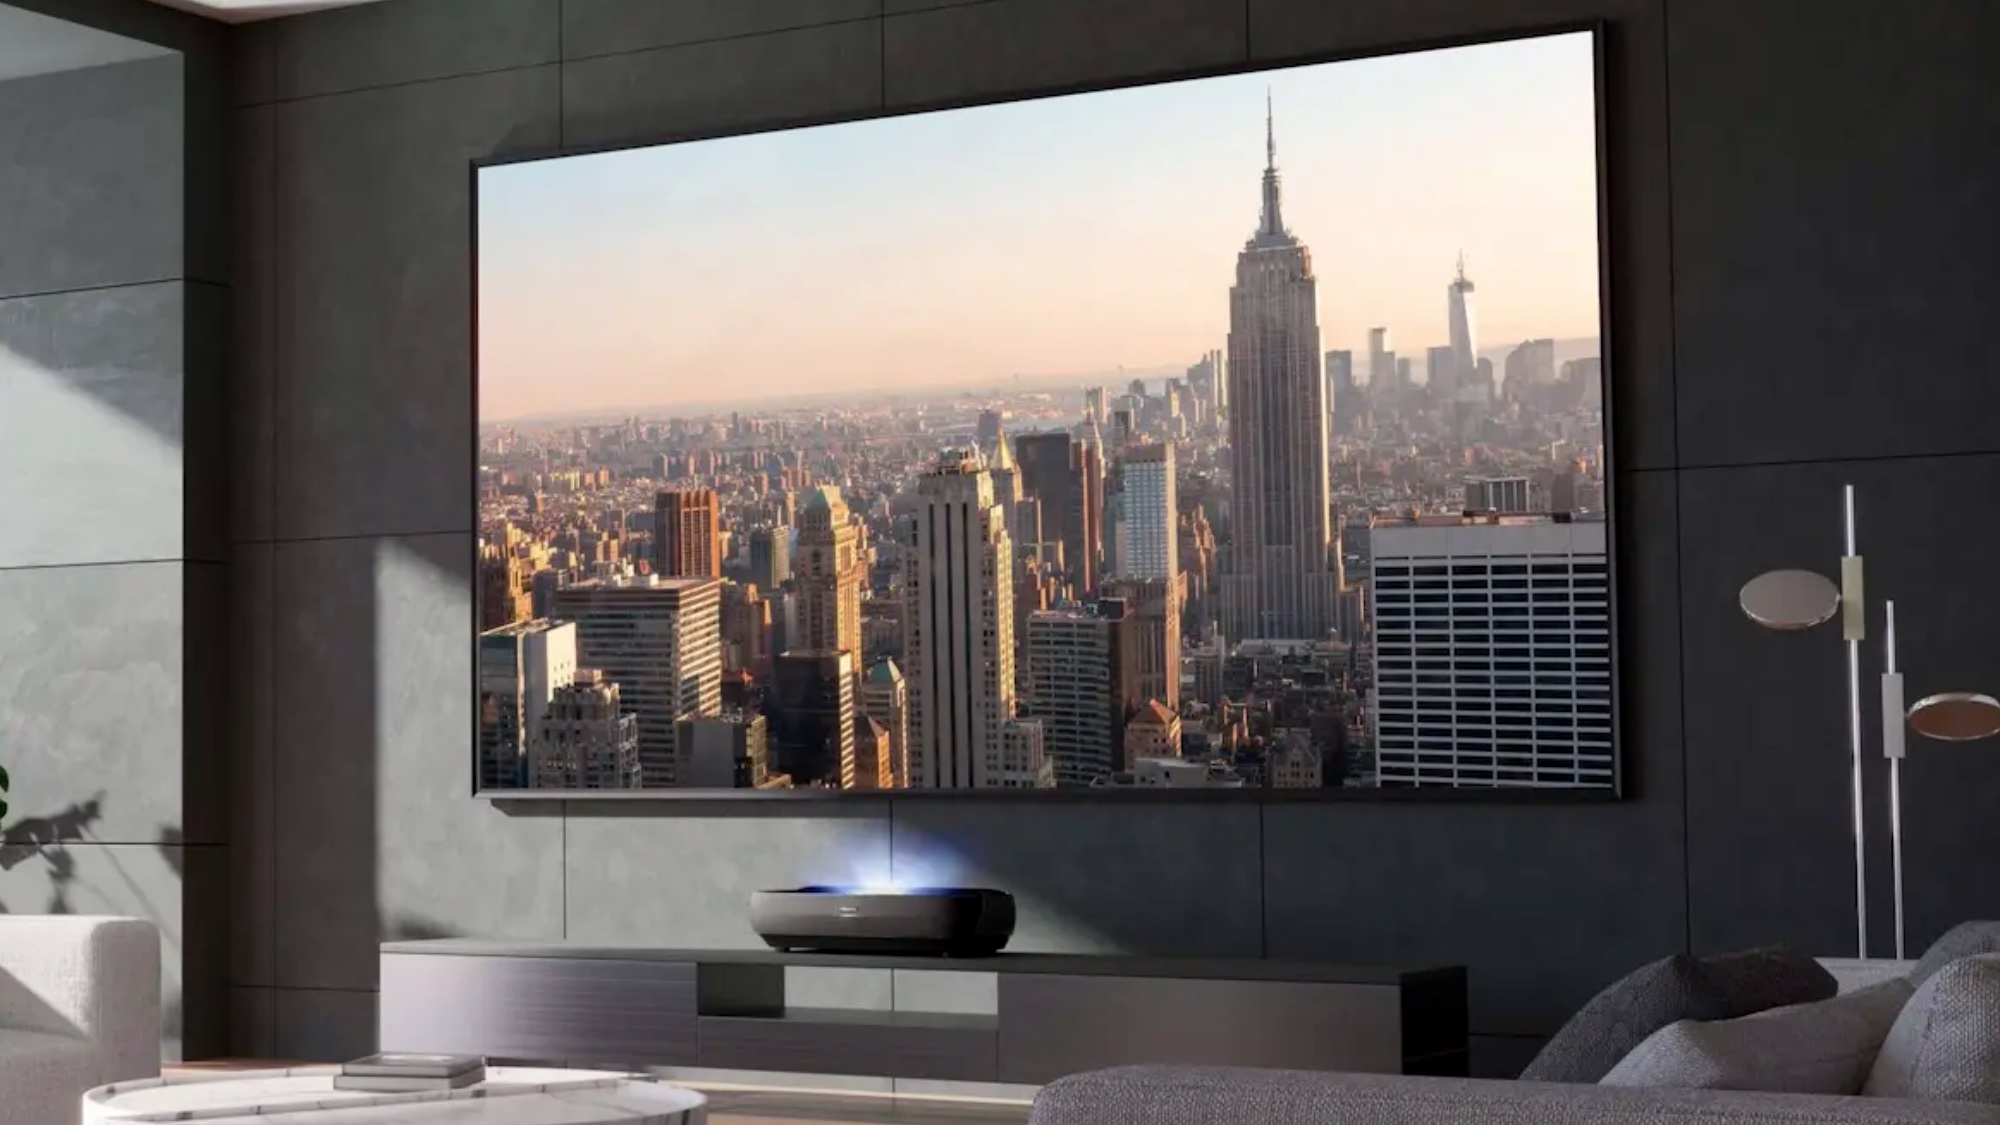 Hands-On With LG's 100-Inch Laser TV